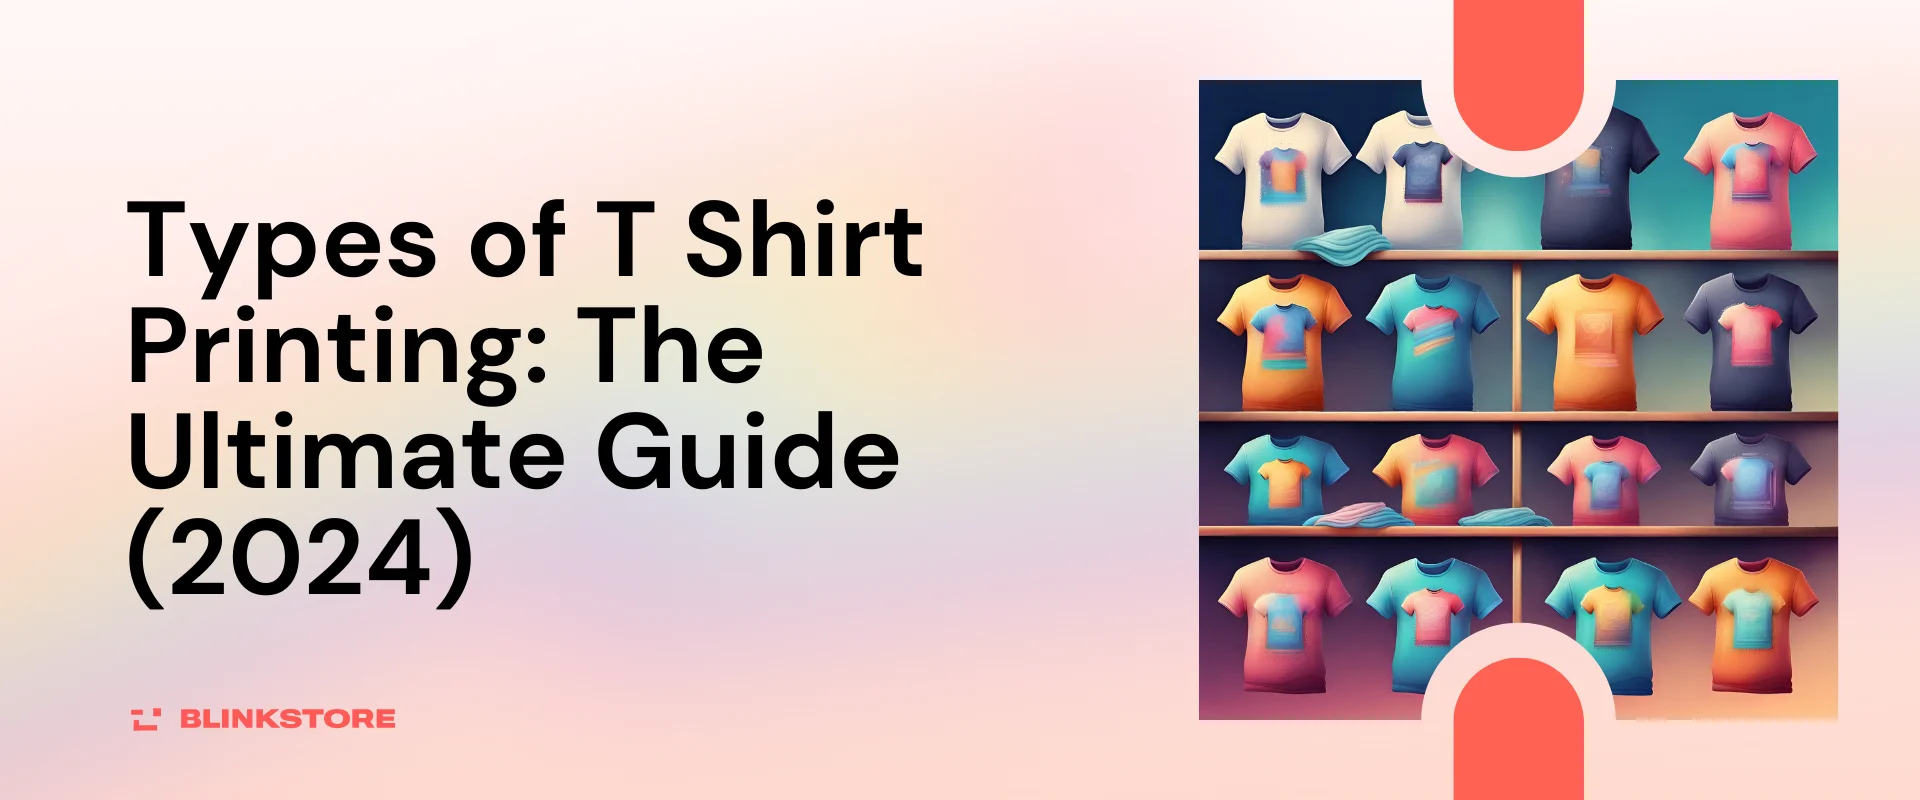 Types of T Shirt Printing: The Ultimate Guide (2024)